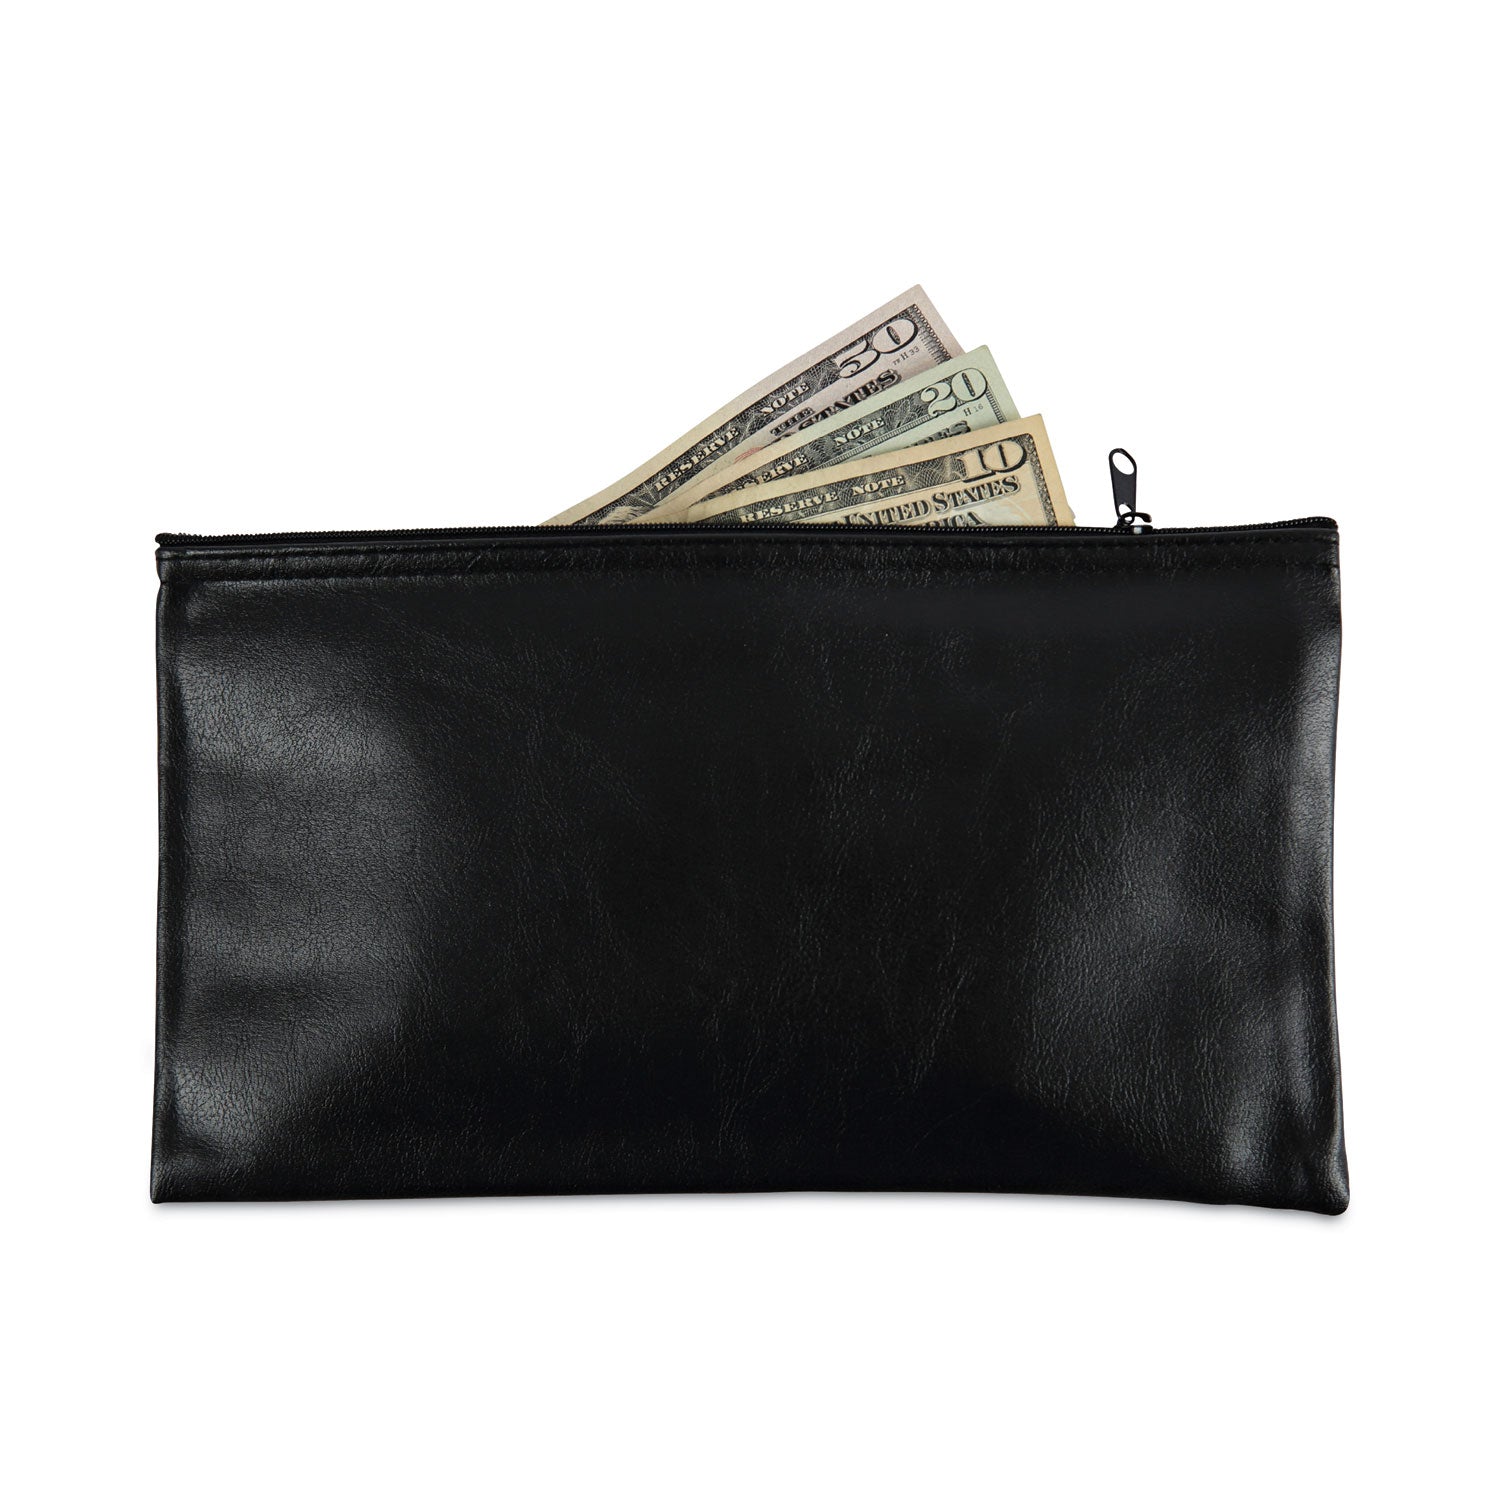 zippered-wallets-cases-leatherette-pu-11-x-6-black-2-pack_unv69021 - 2